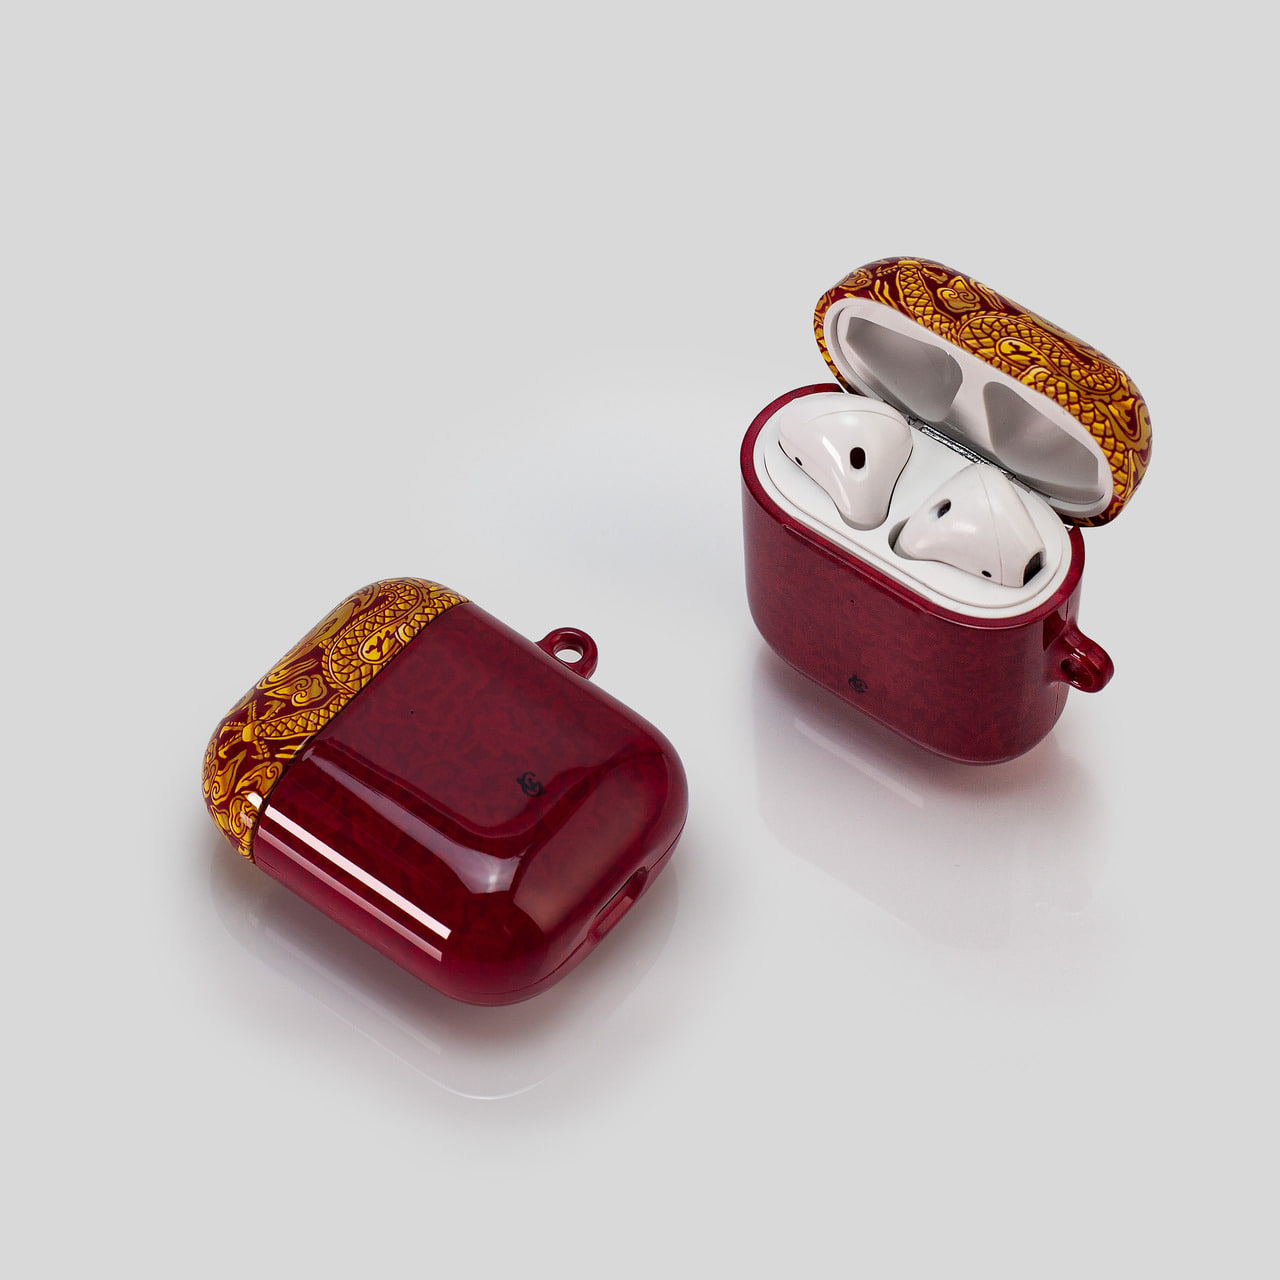 [Airpods cases] About Korea No.04